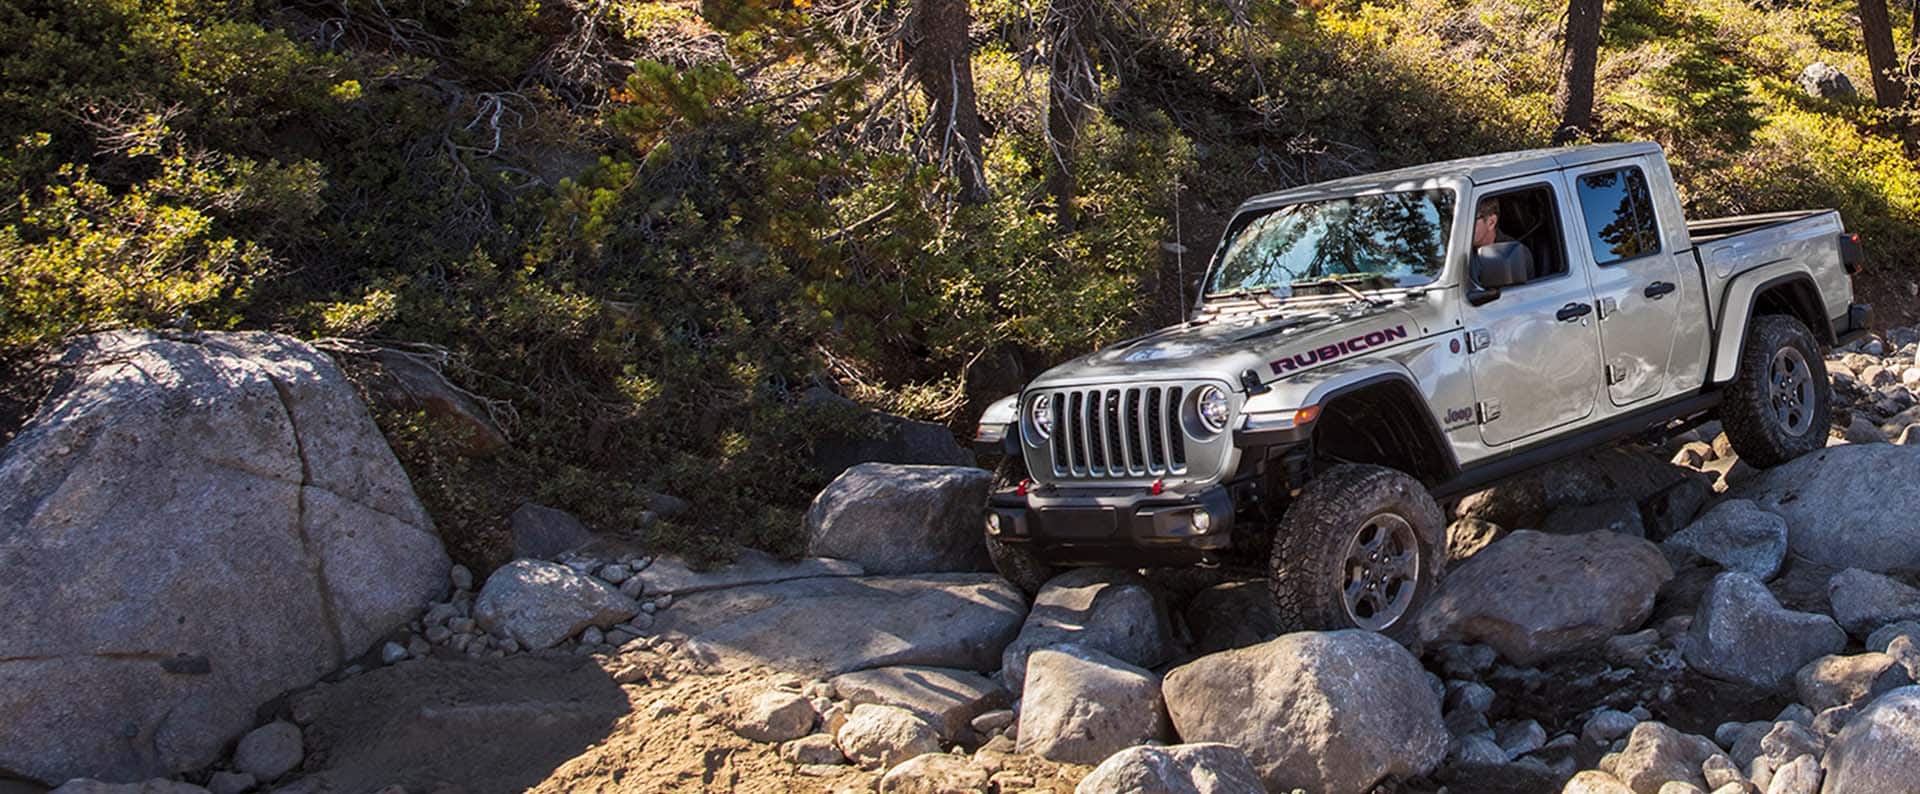 The 2023 Jeep Gladiator Rubicon being driven downhill on a rocky, uneven slope.